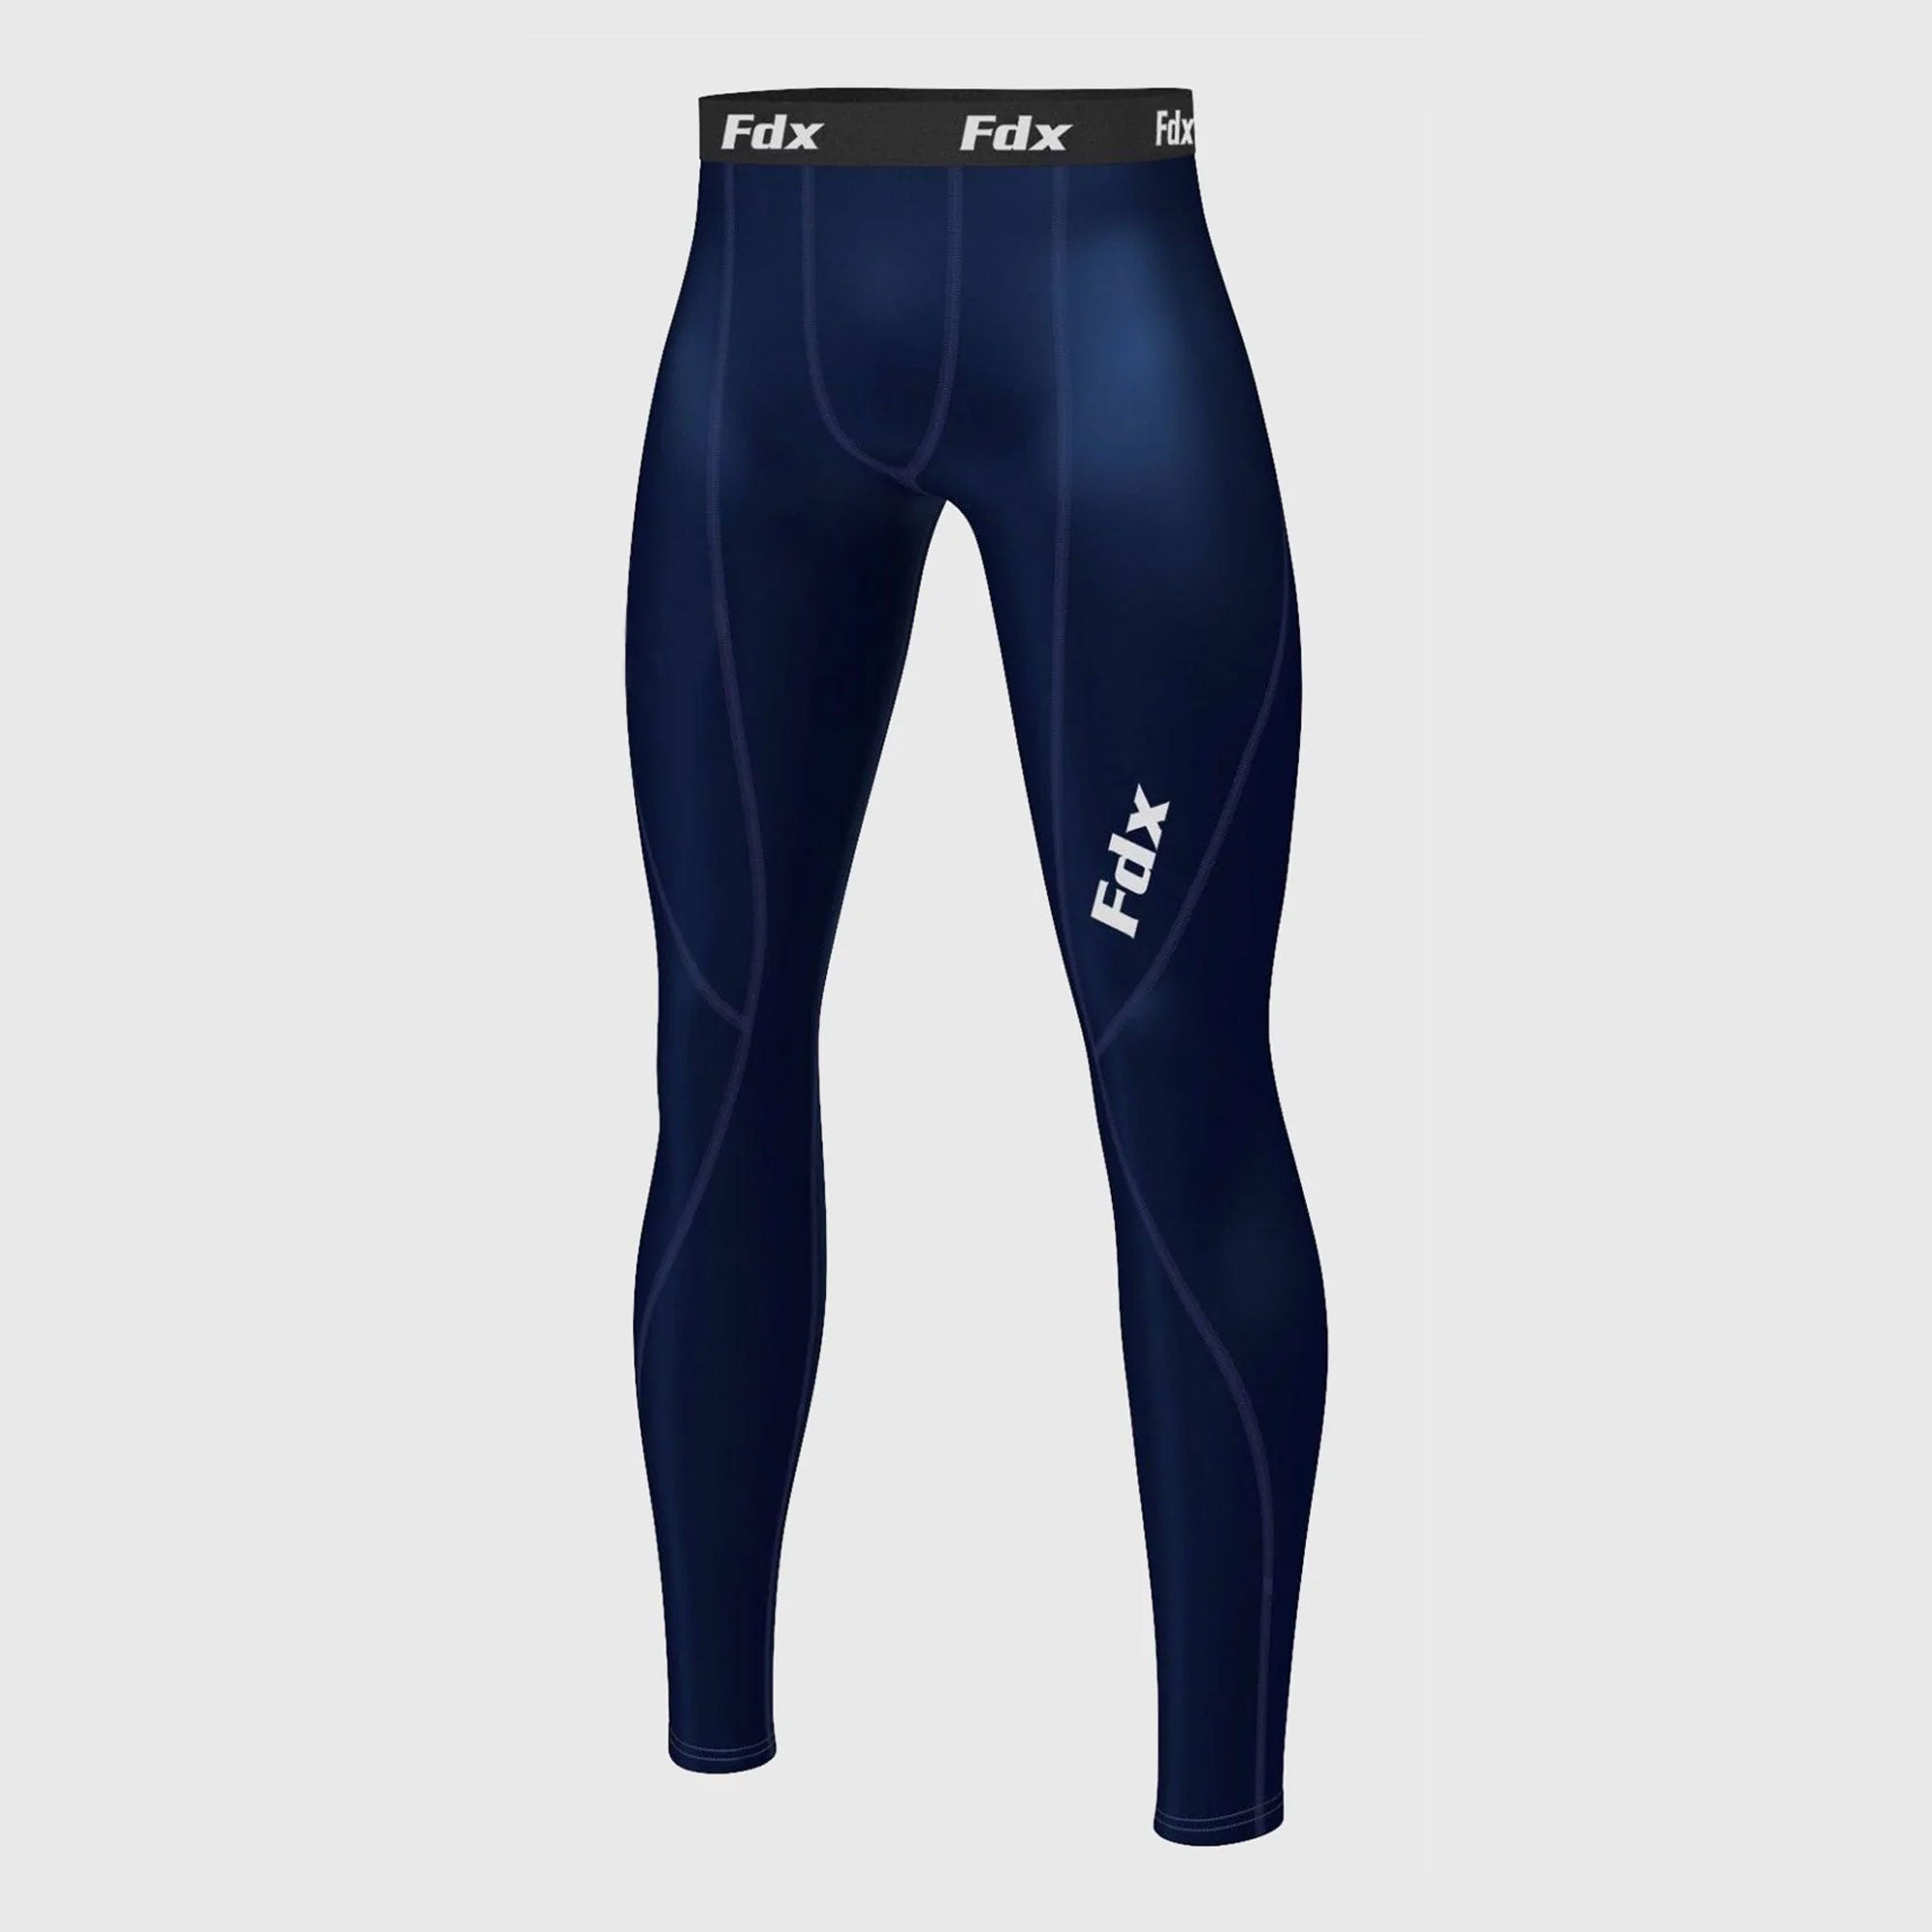 Buy Fdx Women's Workout & Compression Tights